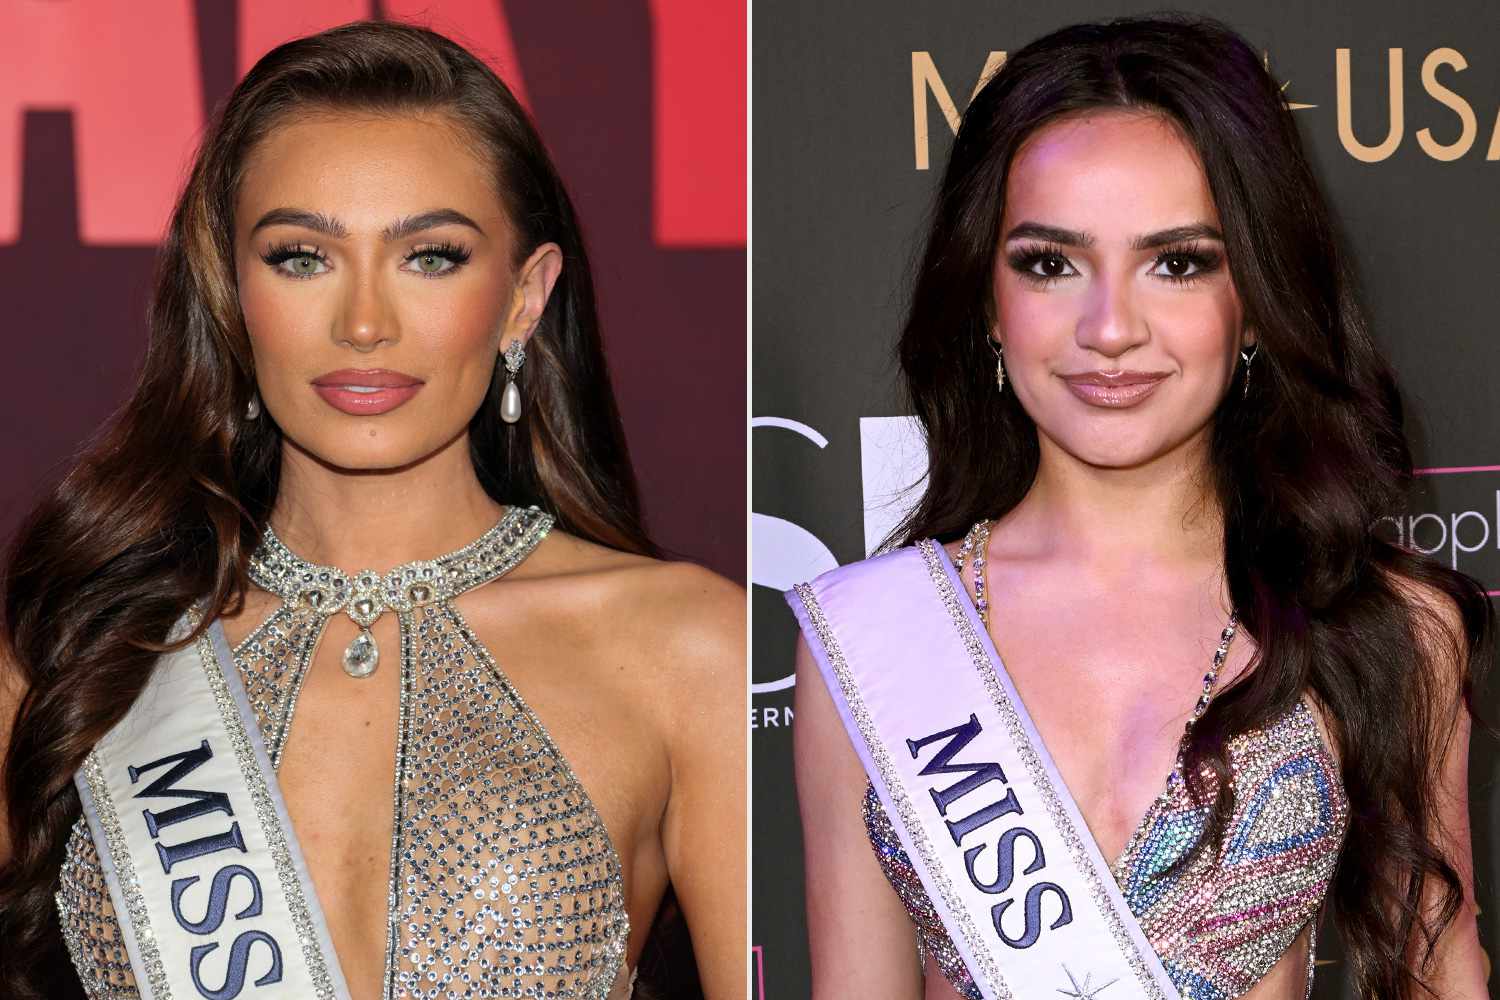 Before Miss USA Resignations, Ex-Employee Spoke Out About Alleged 'Toxicity' and 'Bullying' at the Organization